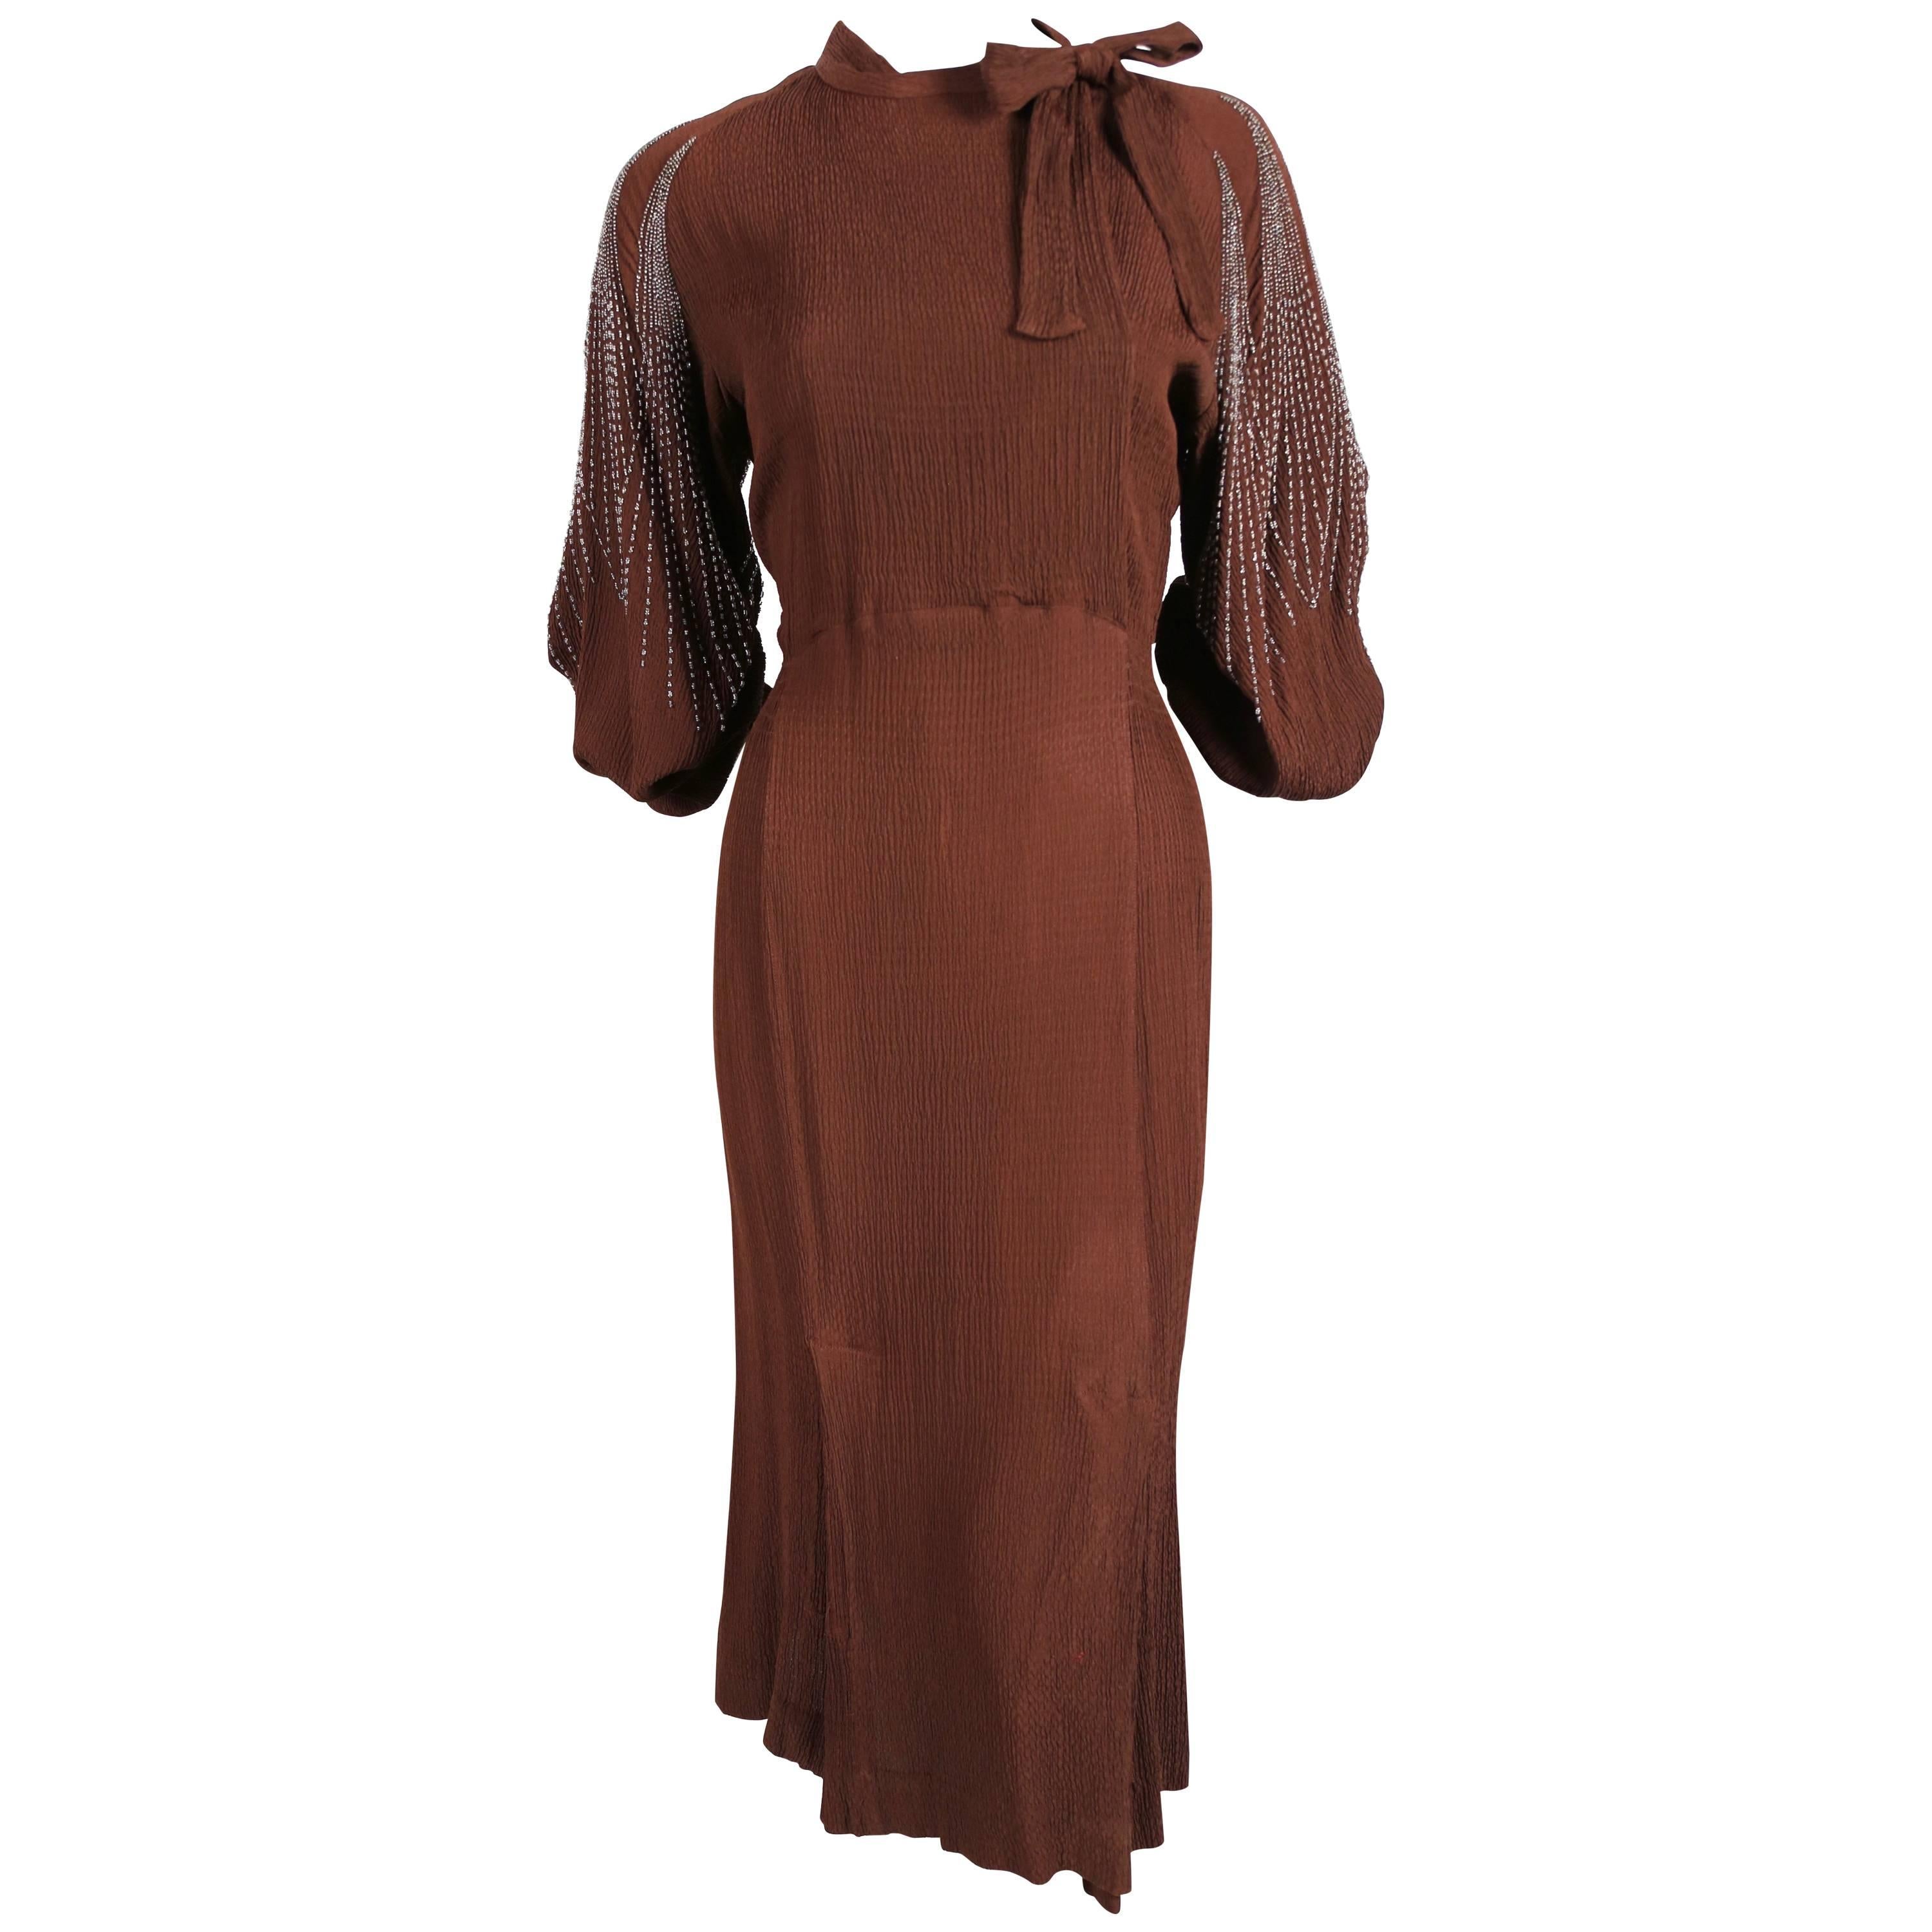 1930's MAINBOCHER PARIS crepe dress with beaded sleeves